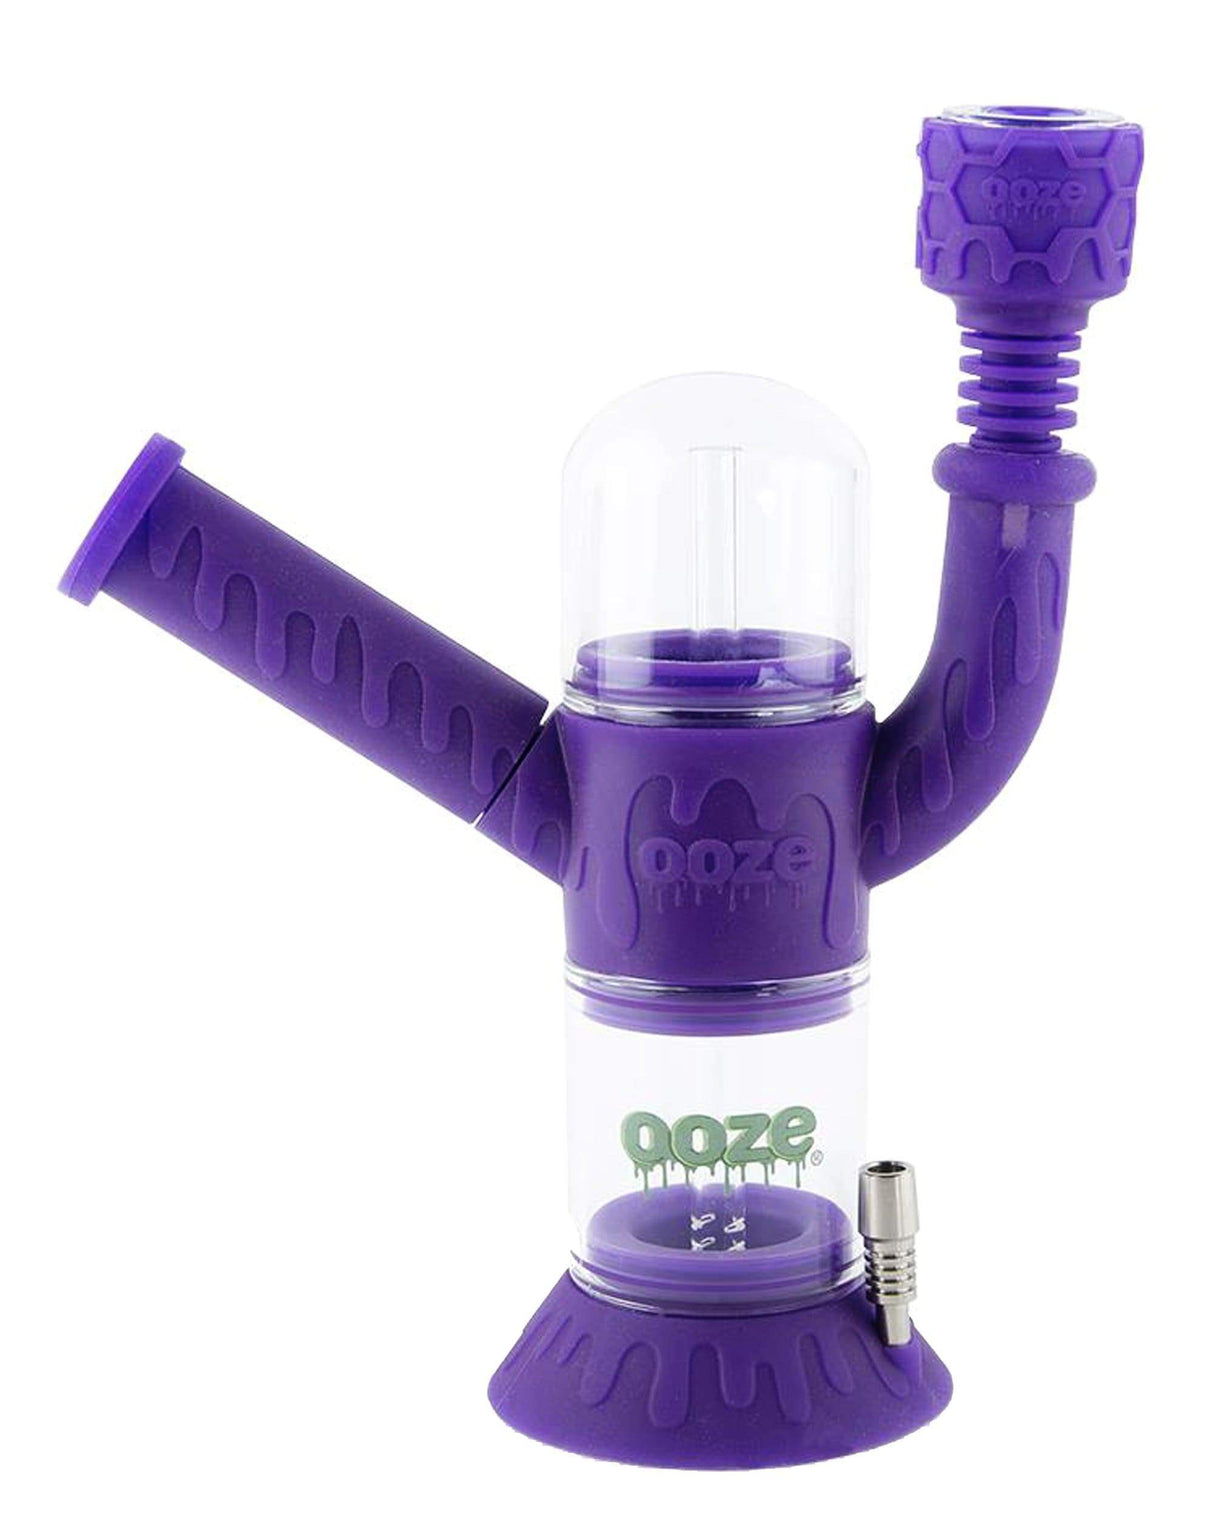 Ooze Cranium Bong & Dab Rig in Purple with Quartz Banger and Slitted Percolator